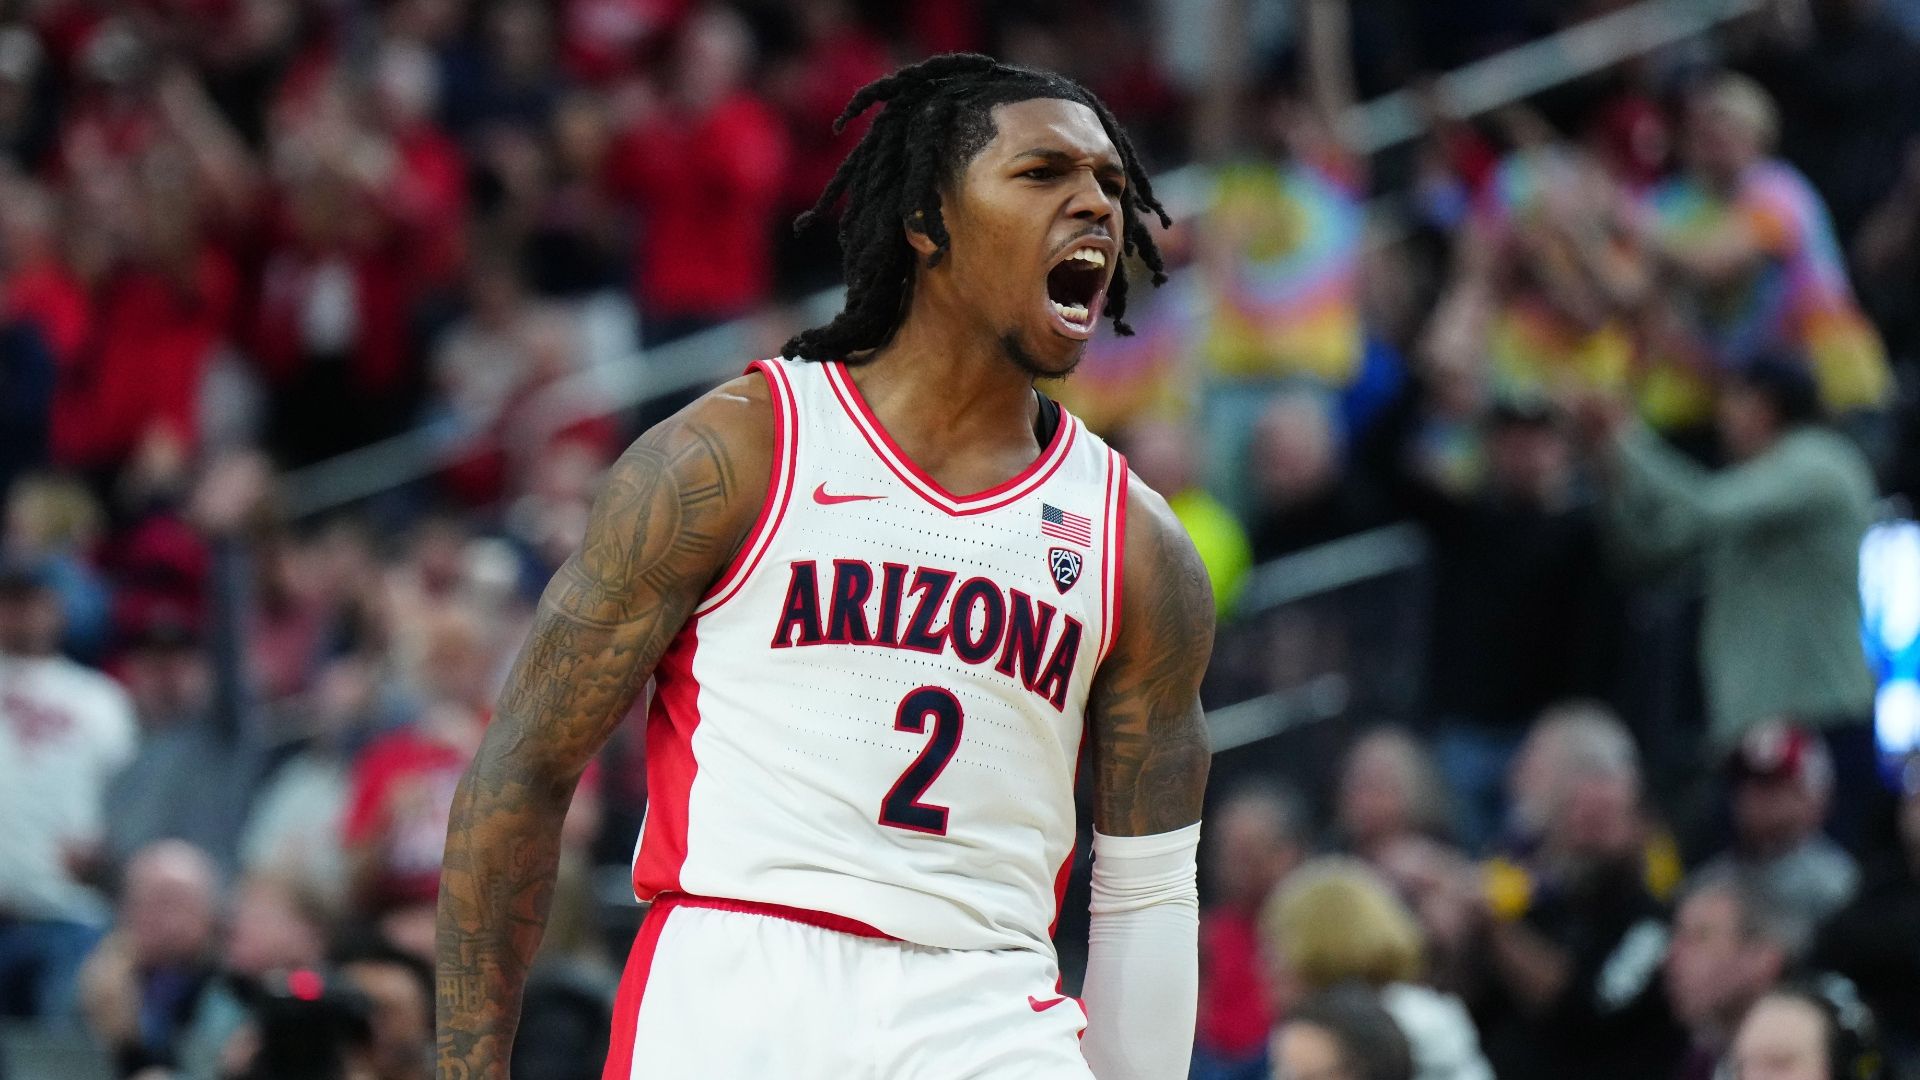 Caleb Love opens up about path to Arizona, relationship with Andre